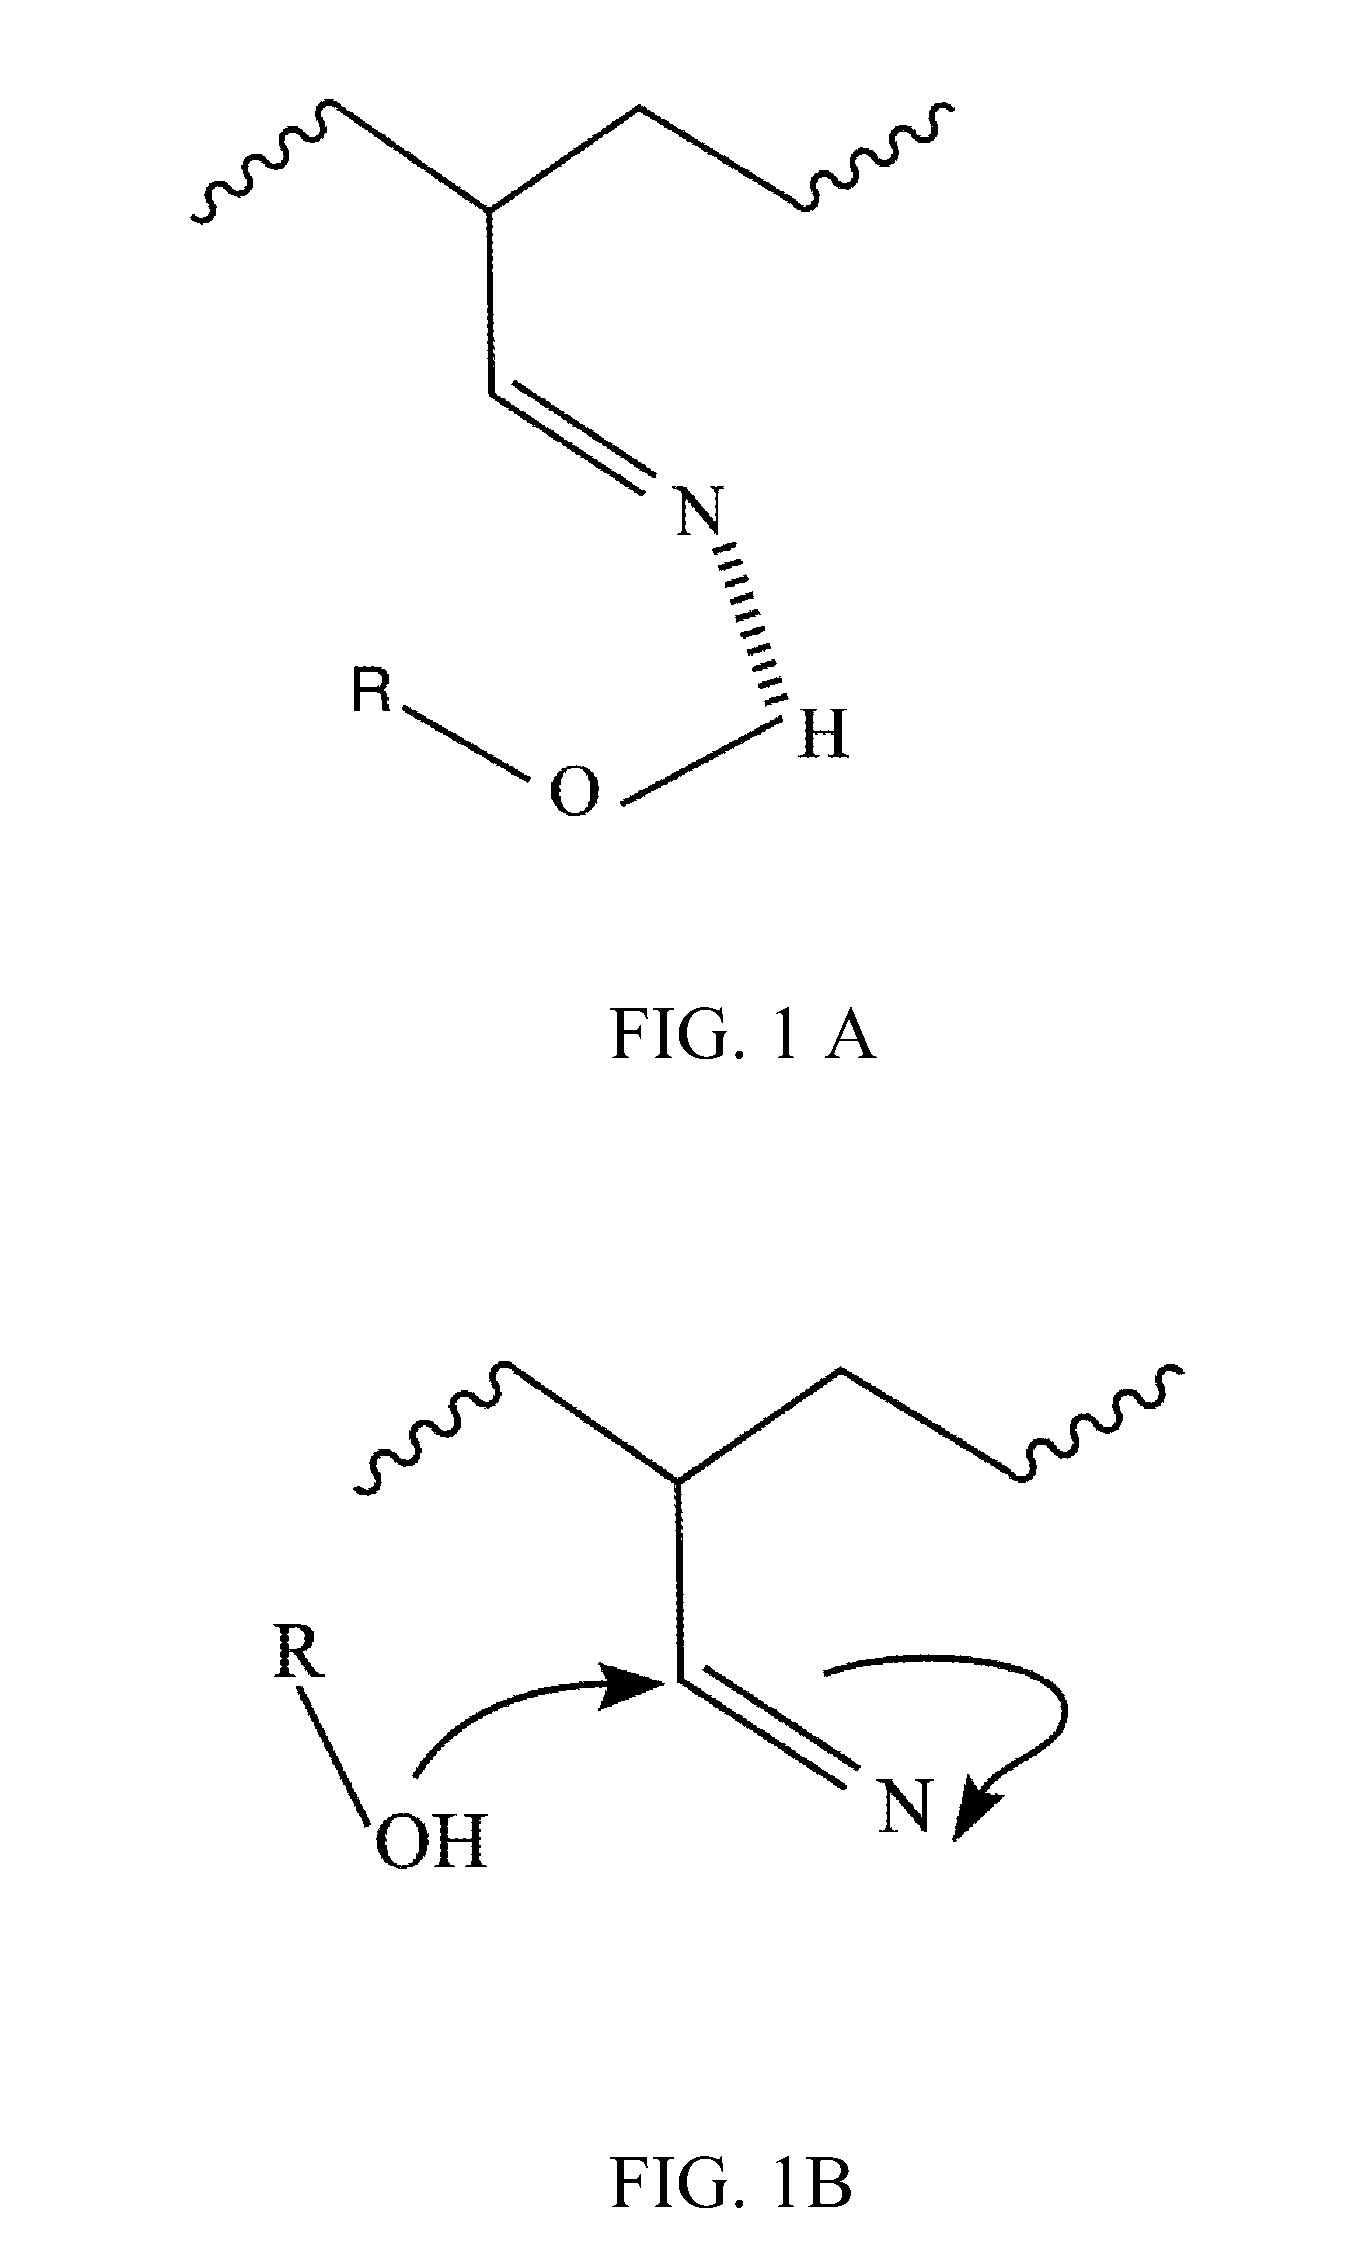 Polymer blend compositions and methods of preparation